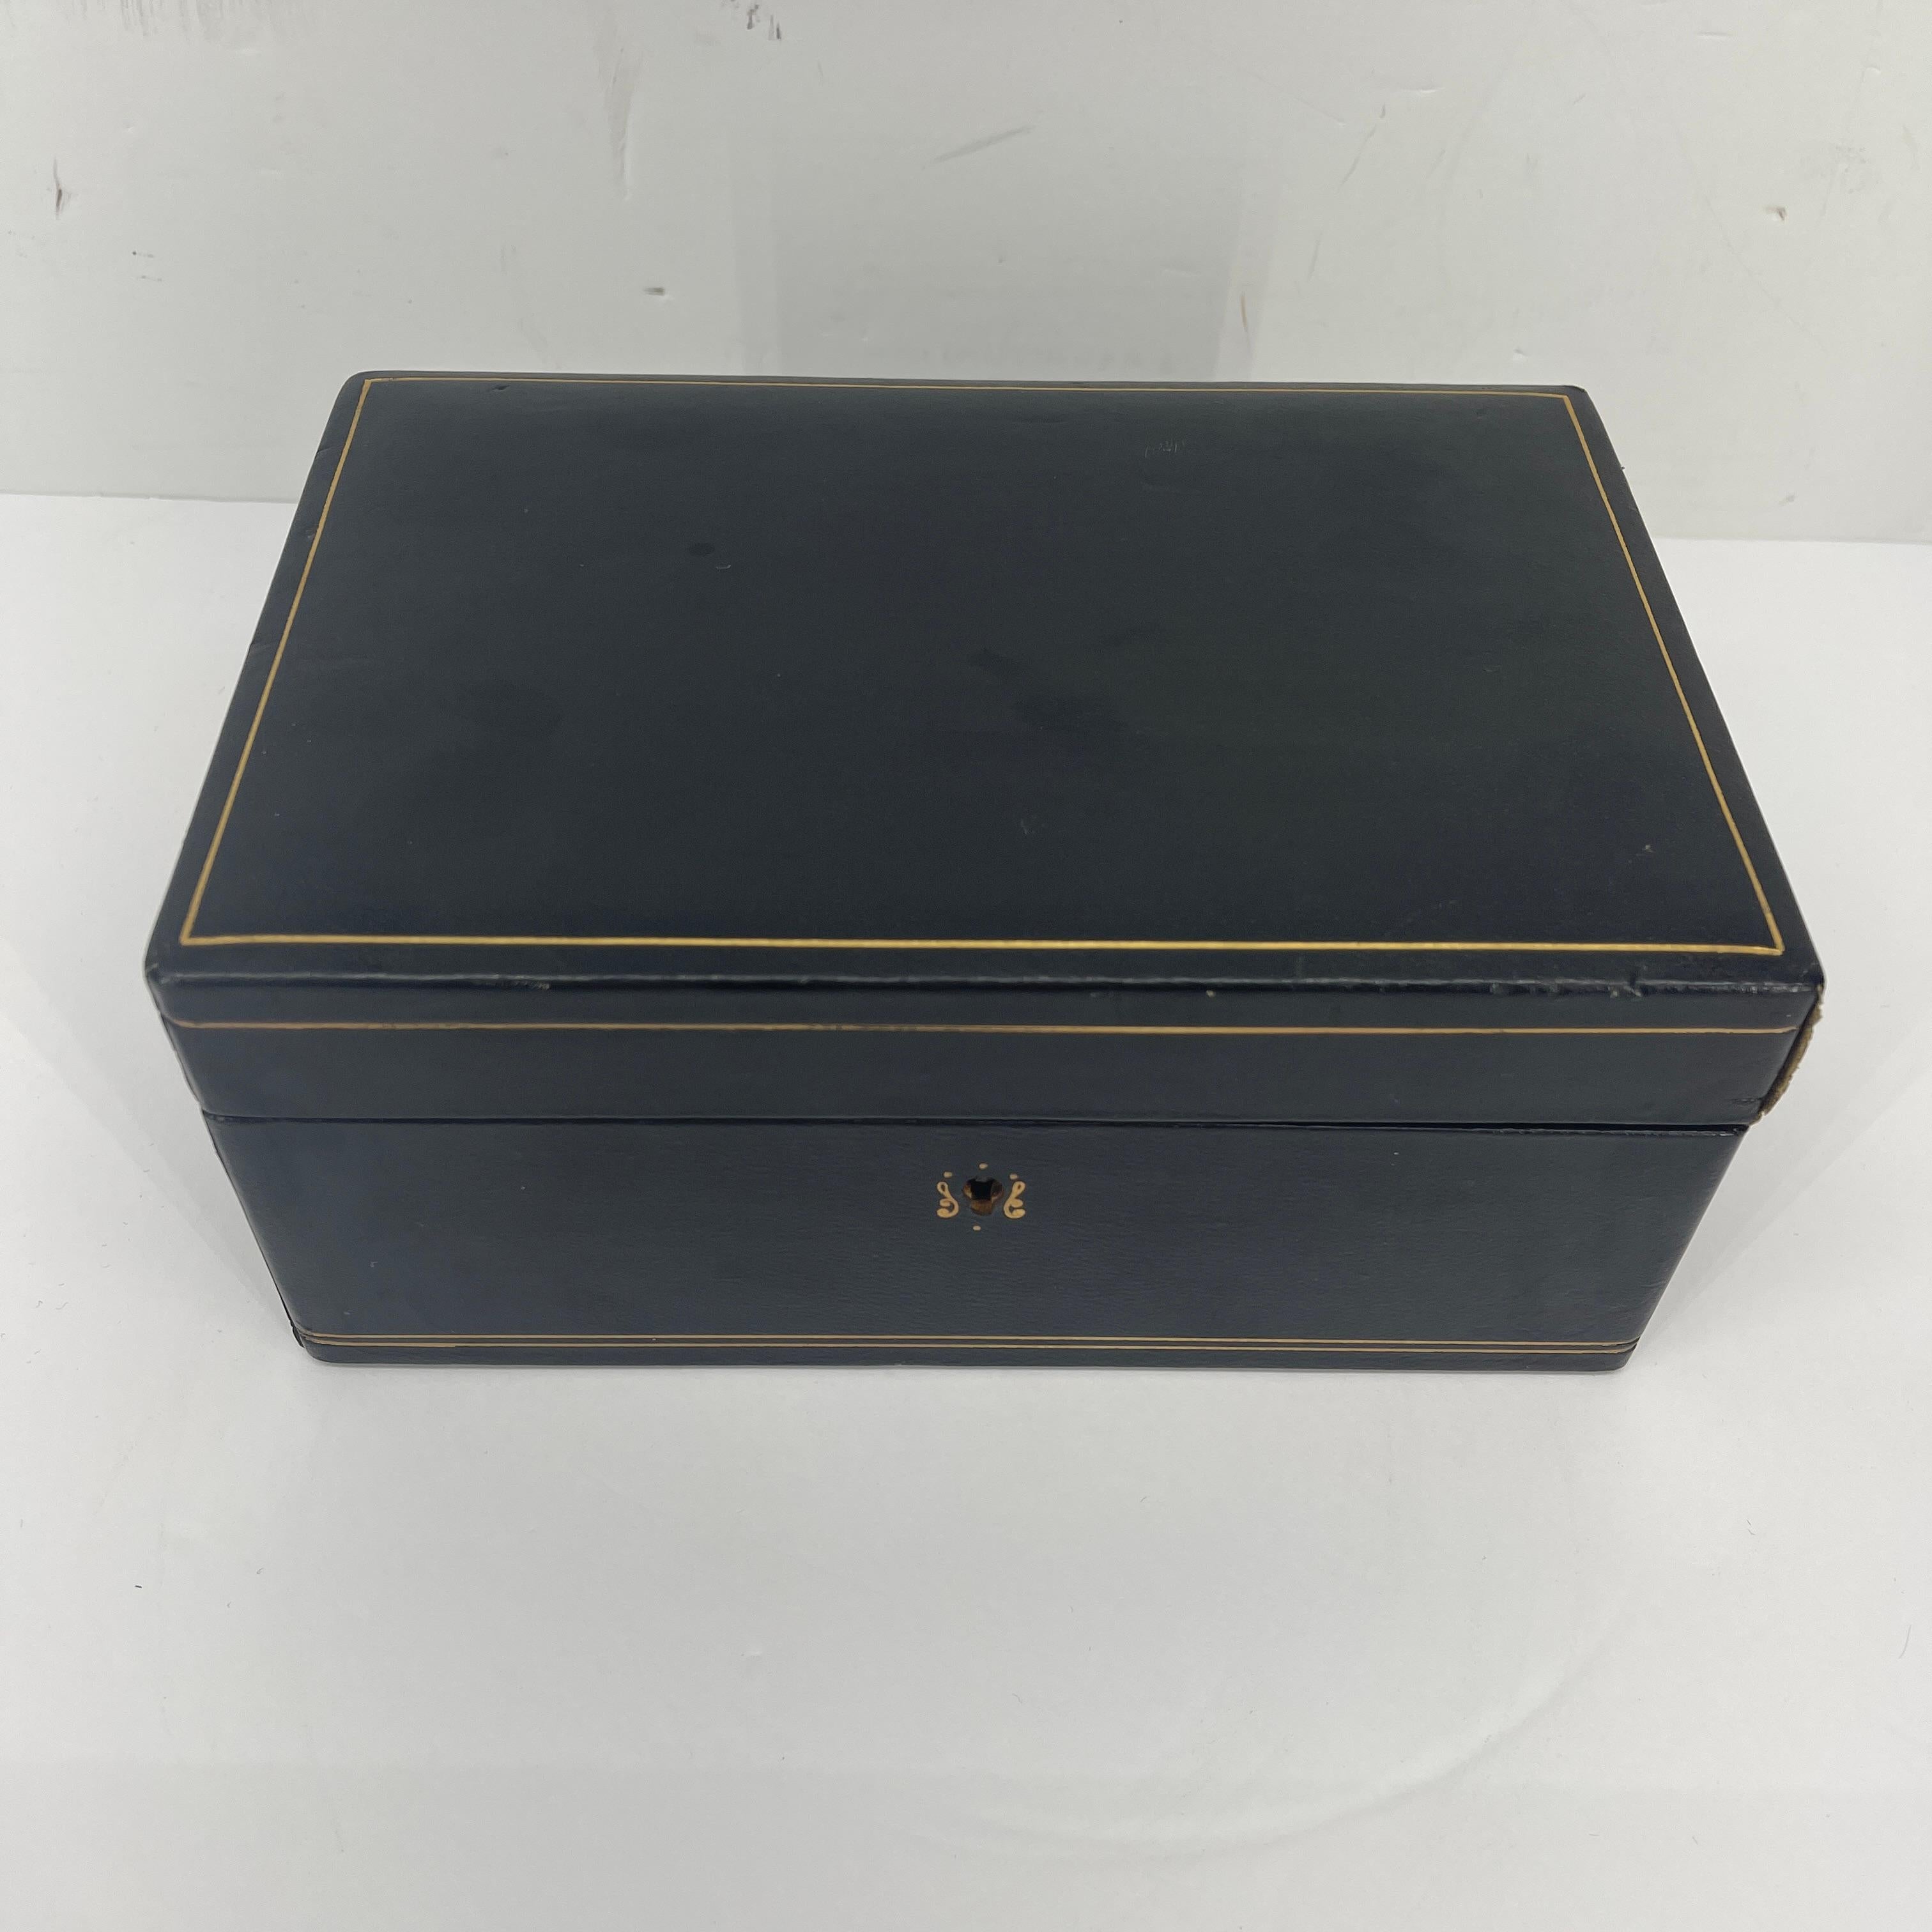 Mid-Century Modern black leather jewelry box. Sweet petite jewelry box in butter soft black leather with red felt interior. This little box is a wonderful addition to your vanity or dressing table. In very good condition, the leather is soft and the